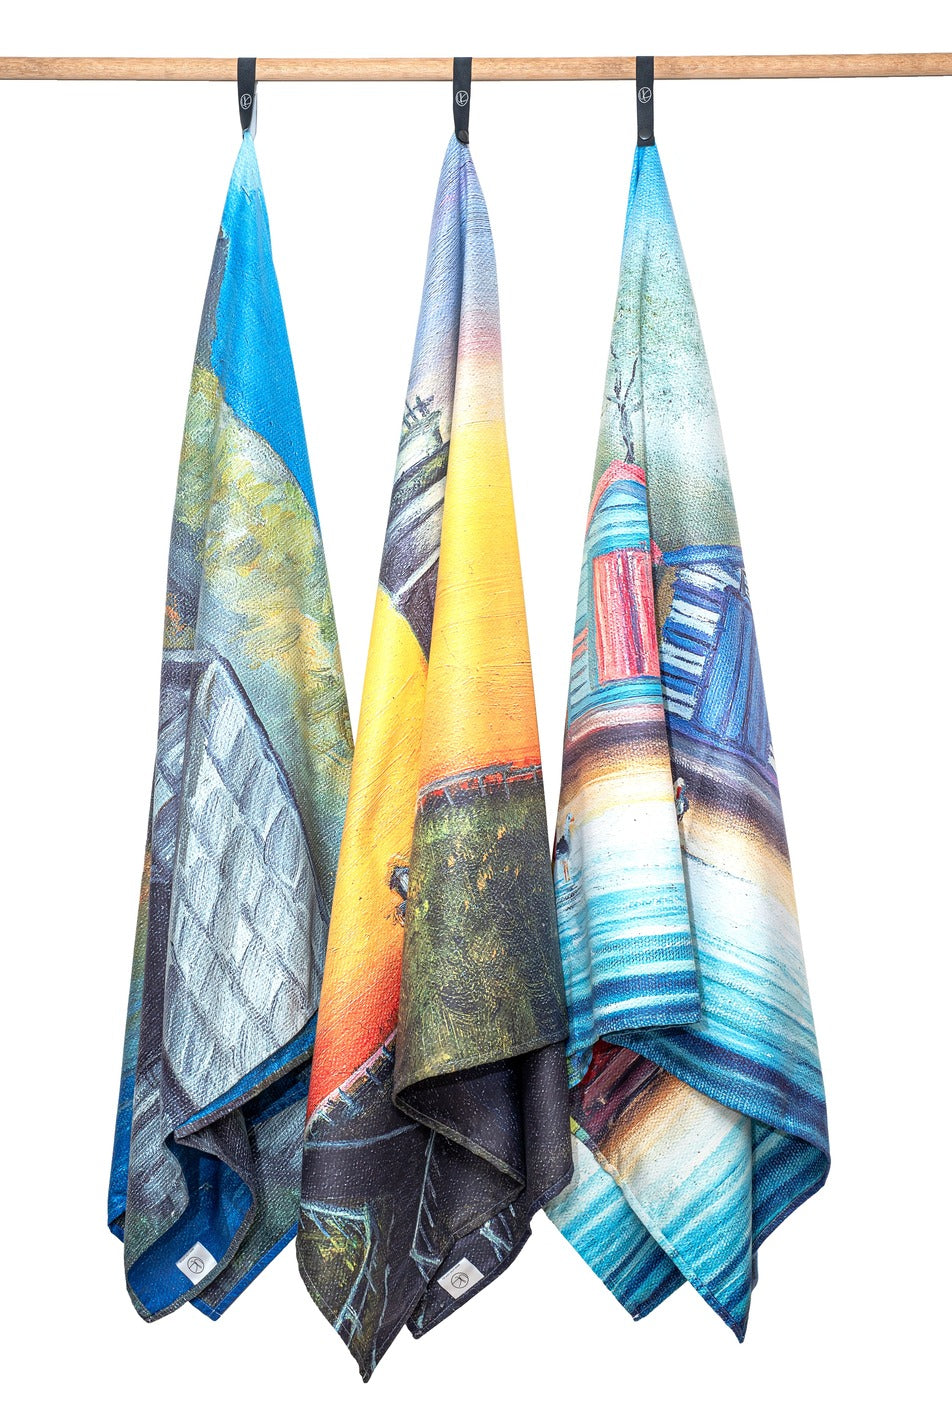 Cradle Mountain, Byron Bay, Brighton Beach Microfibre Artistic Towels hanging. Large size, 170cm x 95cm, soft touch, compact and sand free beach towel. An Aussie-inspired art showcasing magnificent landmarks and the Aussie lifestyle.